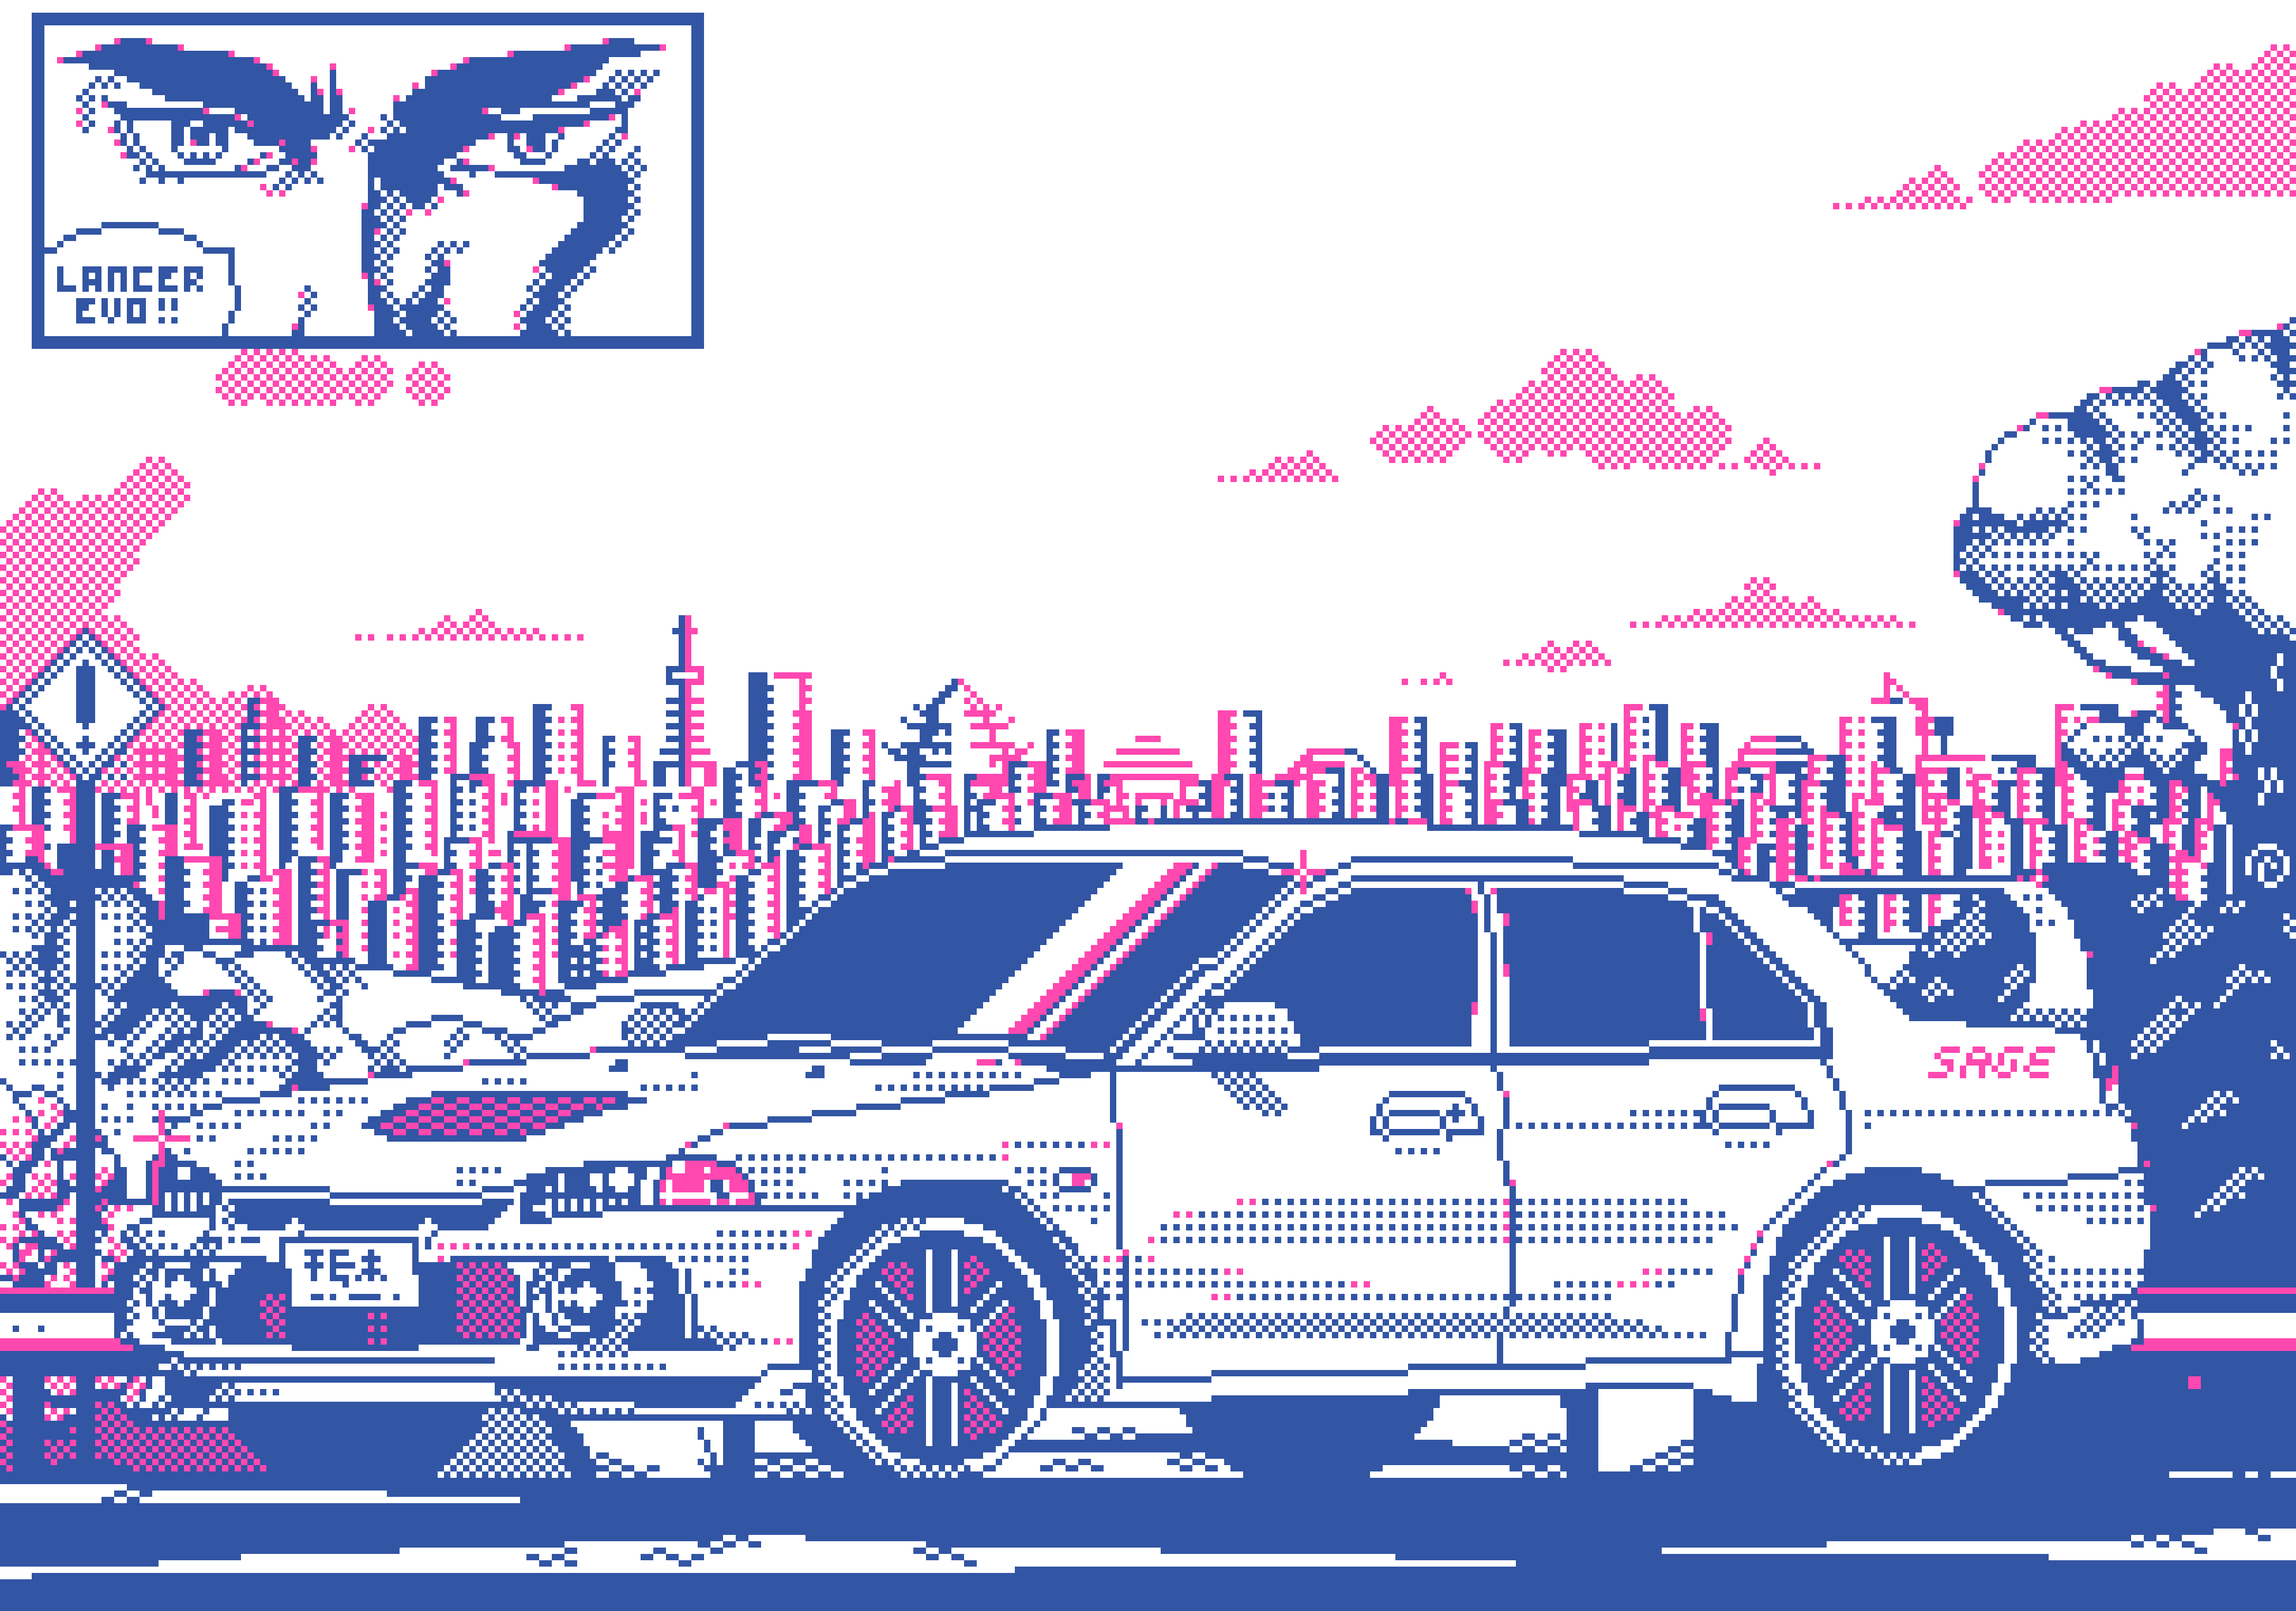 BA Illustration by Sam Dawson, showing a retro car using an old digital style of working, in a pink, white and blue colour pallete.